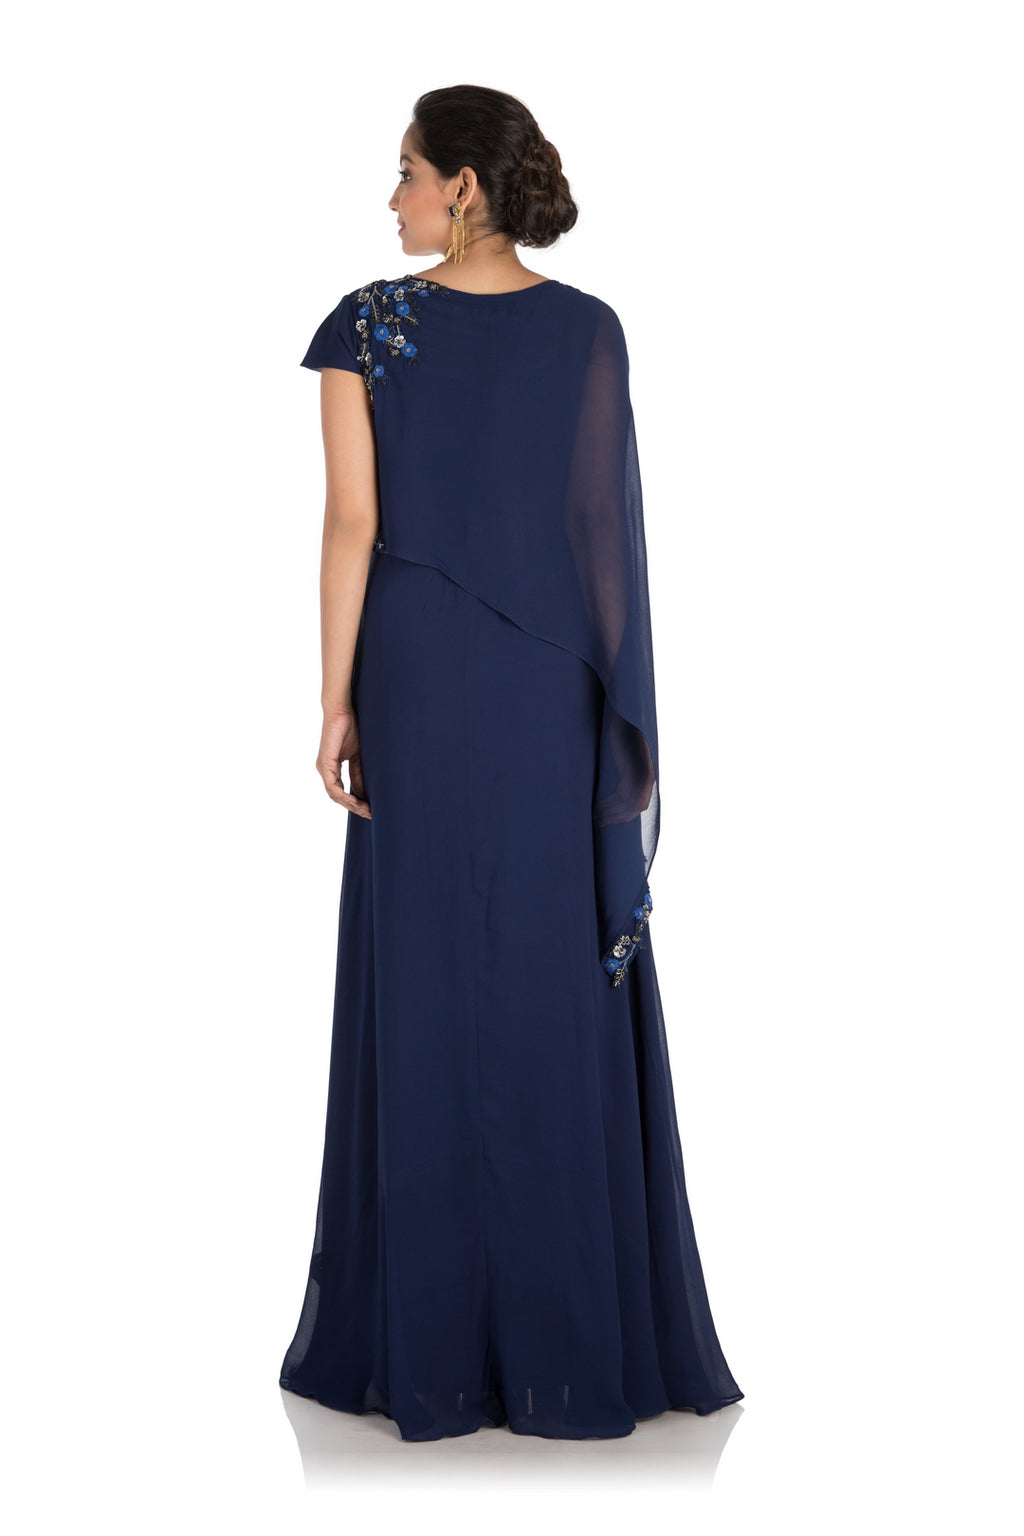 Indigo Blue Gown – Saris and Things